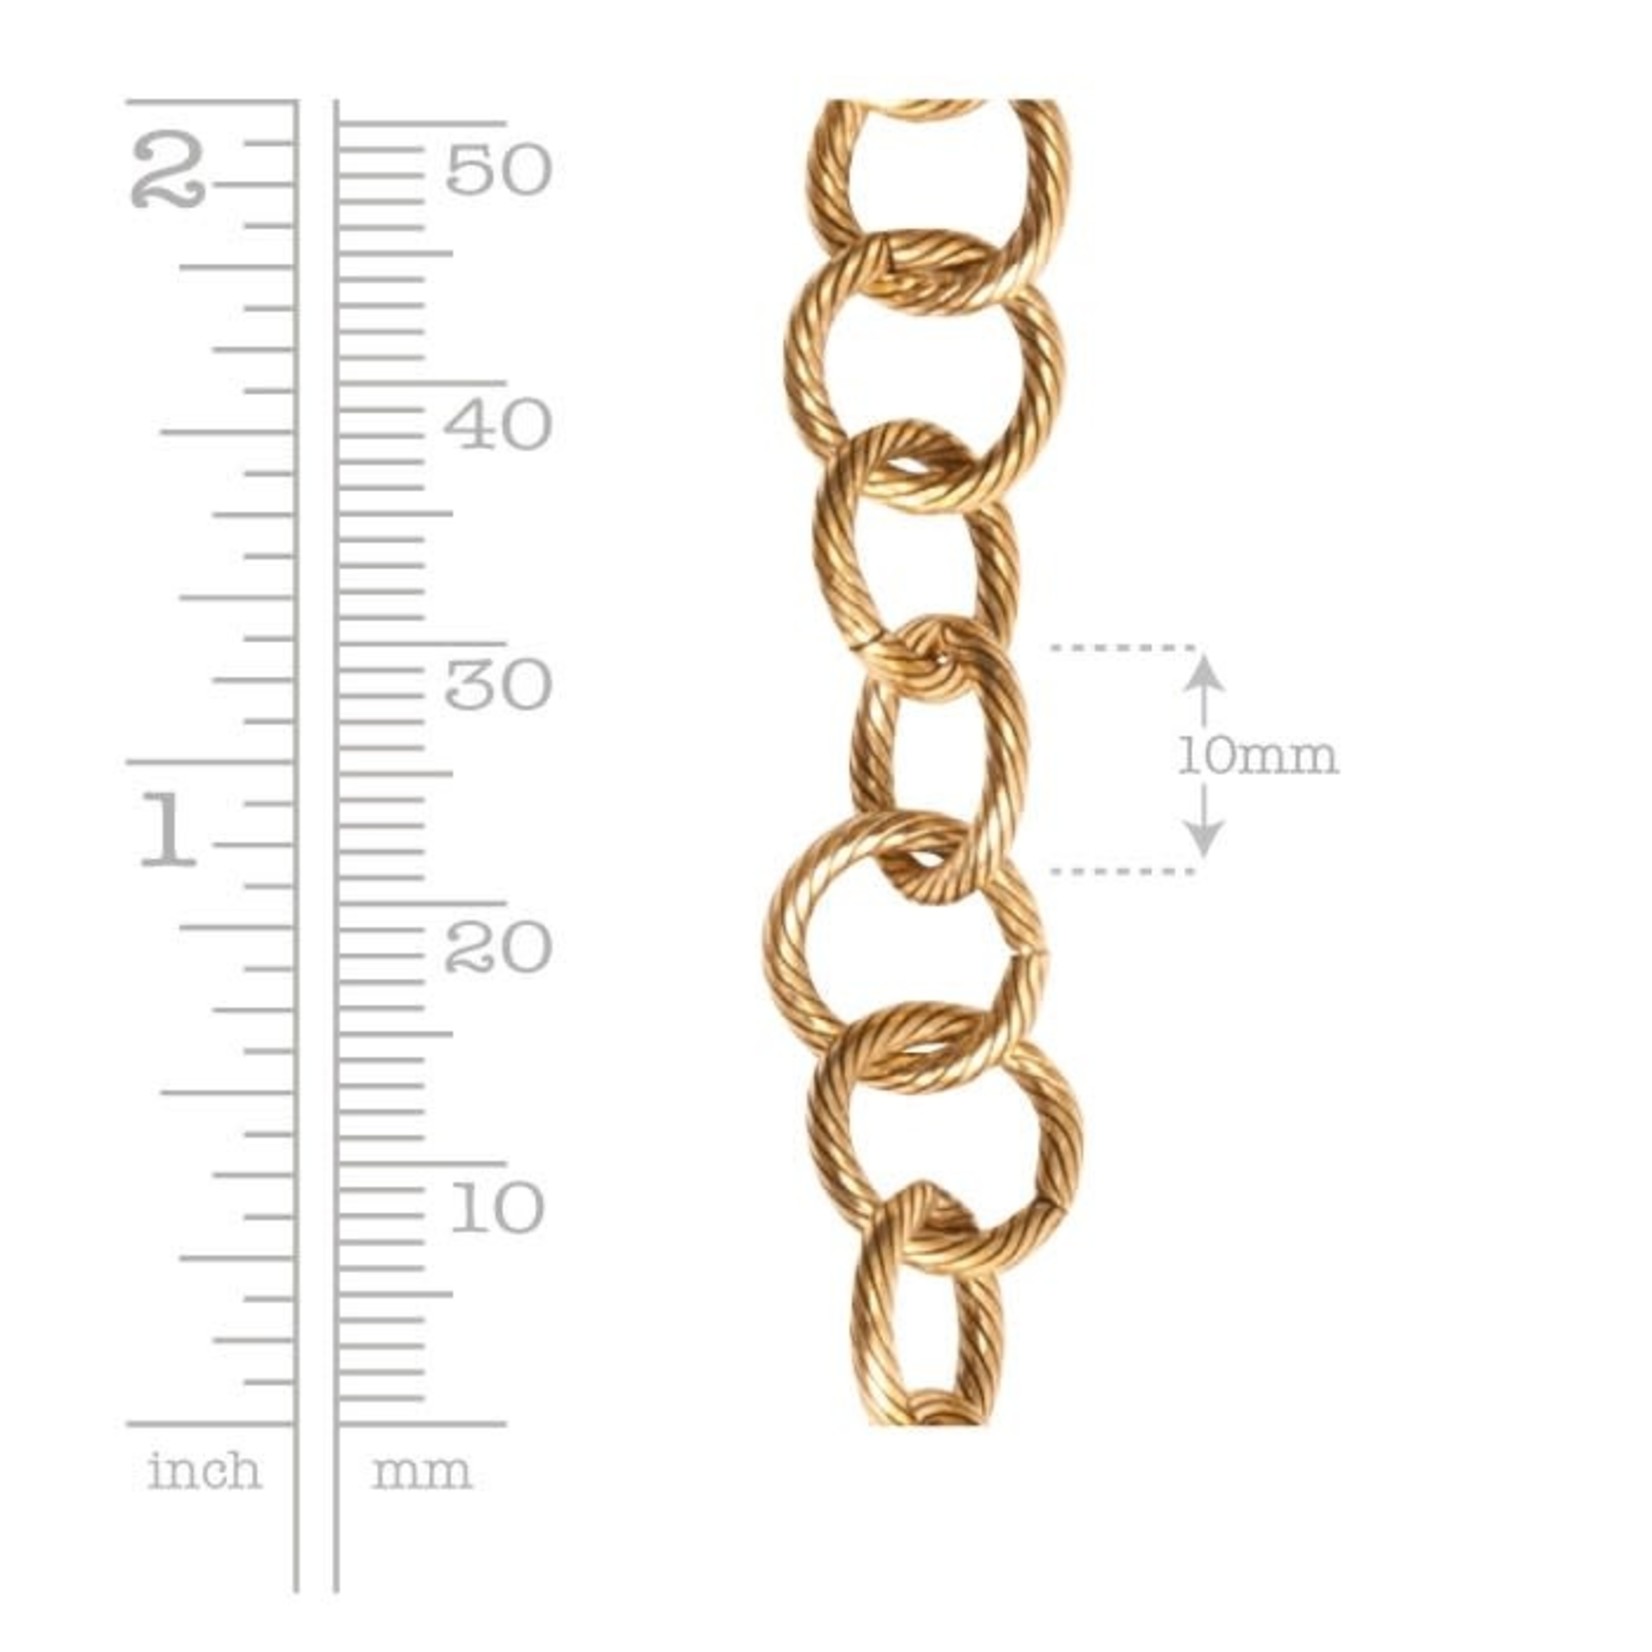 Nunn Design Large loop cable chain - Gold plated